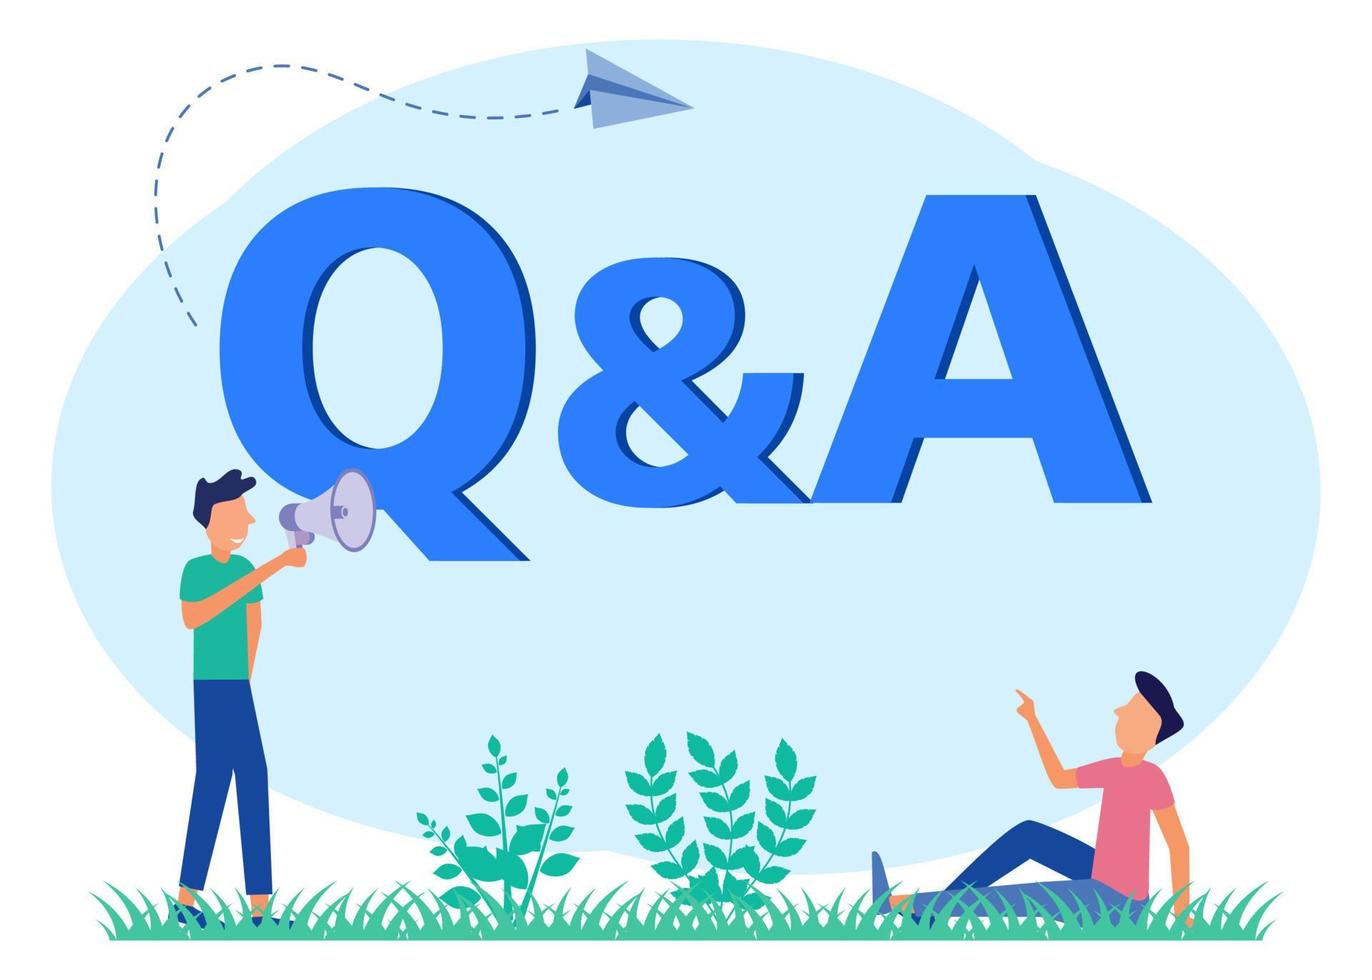 Illustration vector graphic cartoon character of question and answer